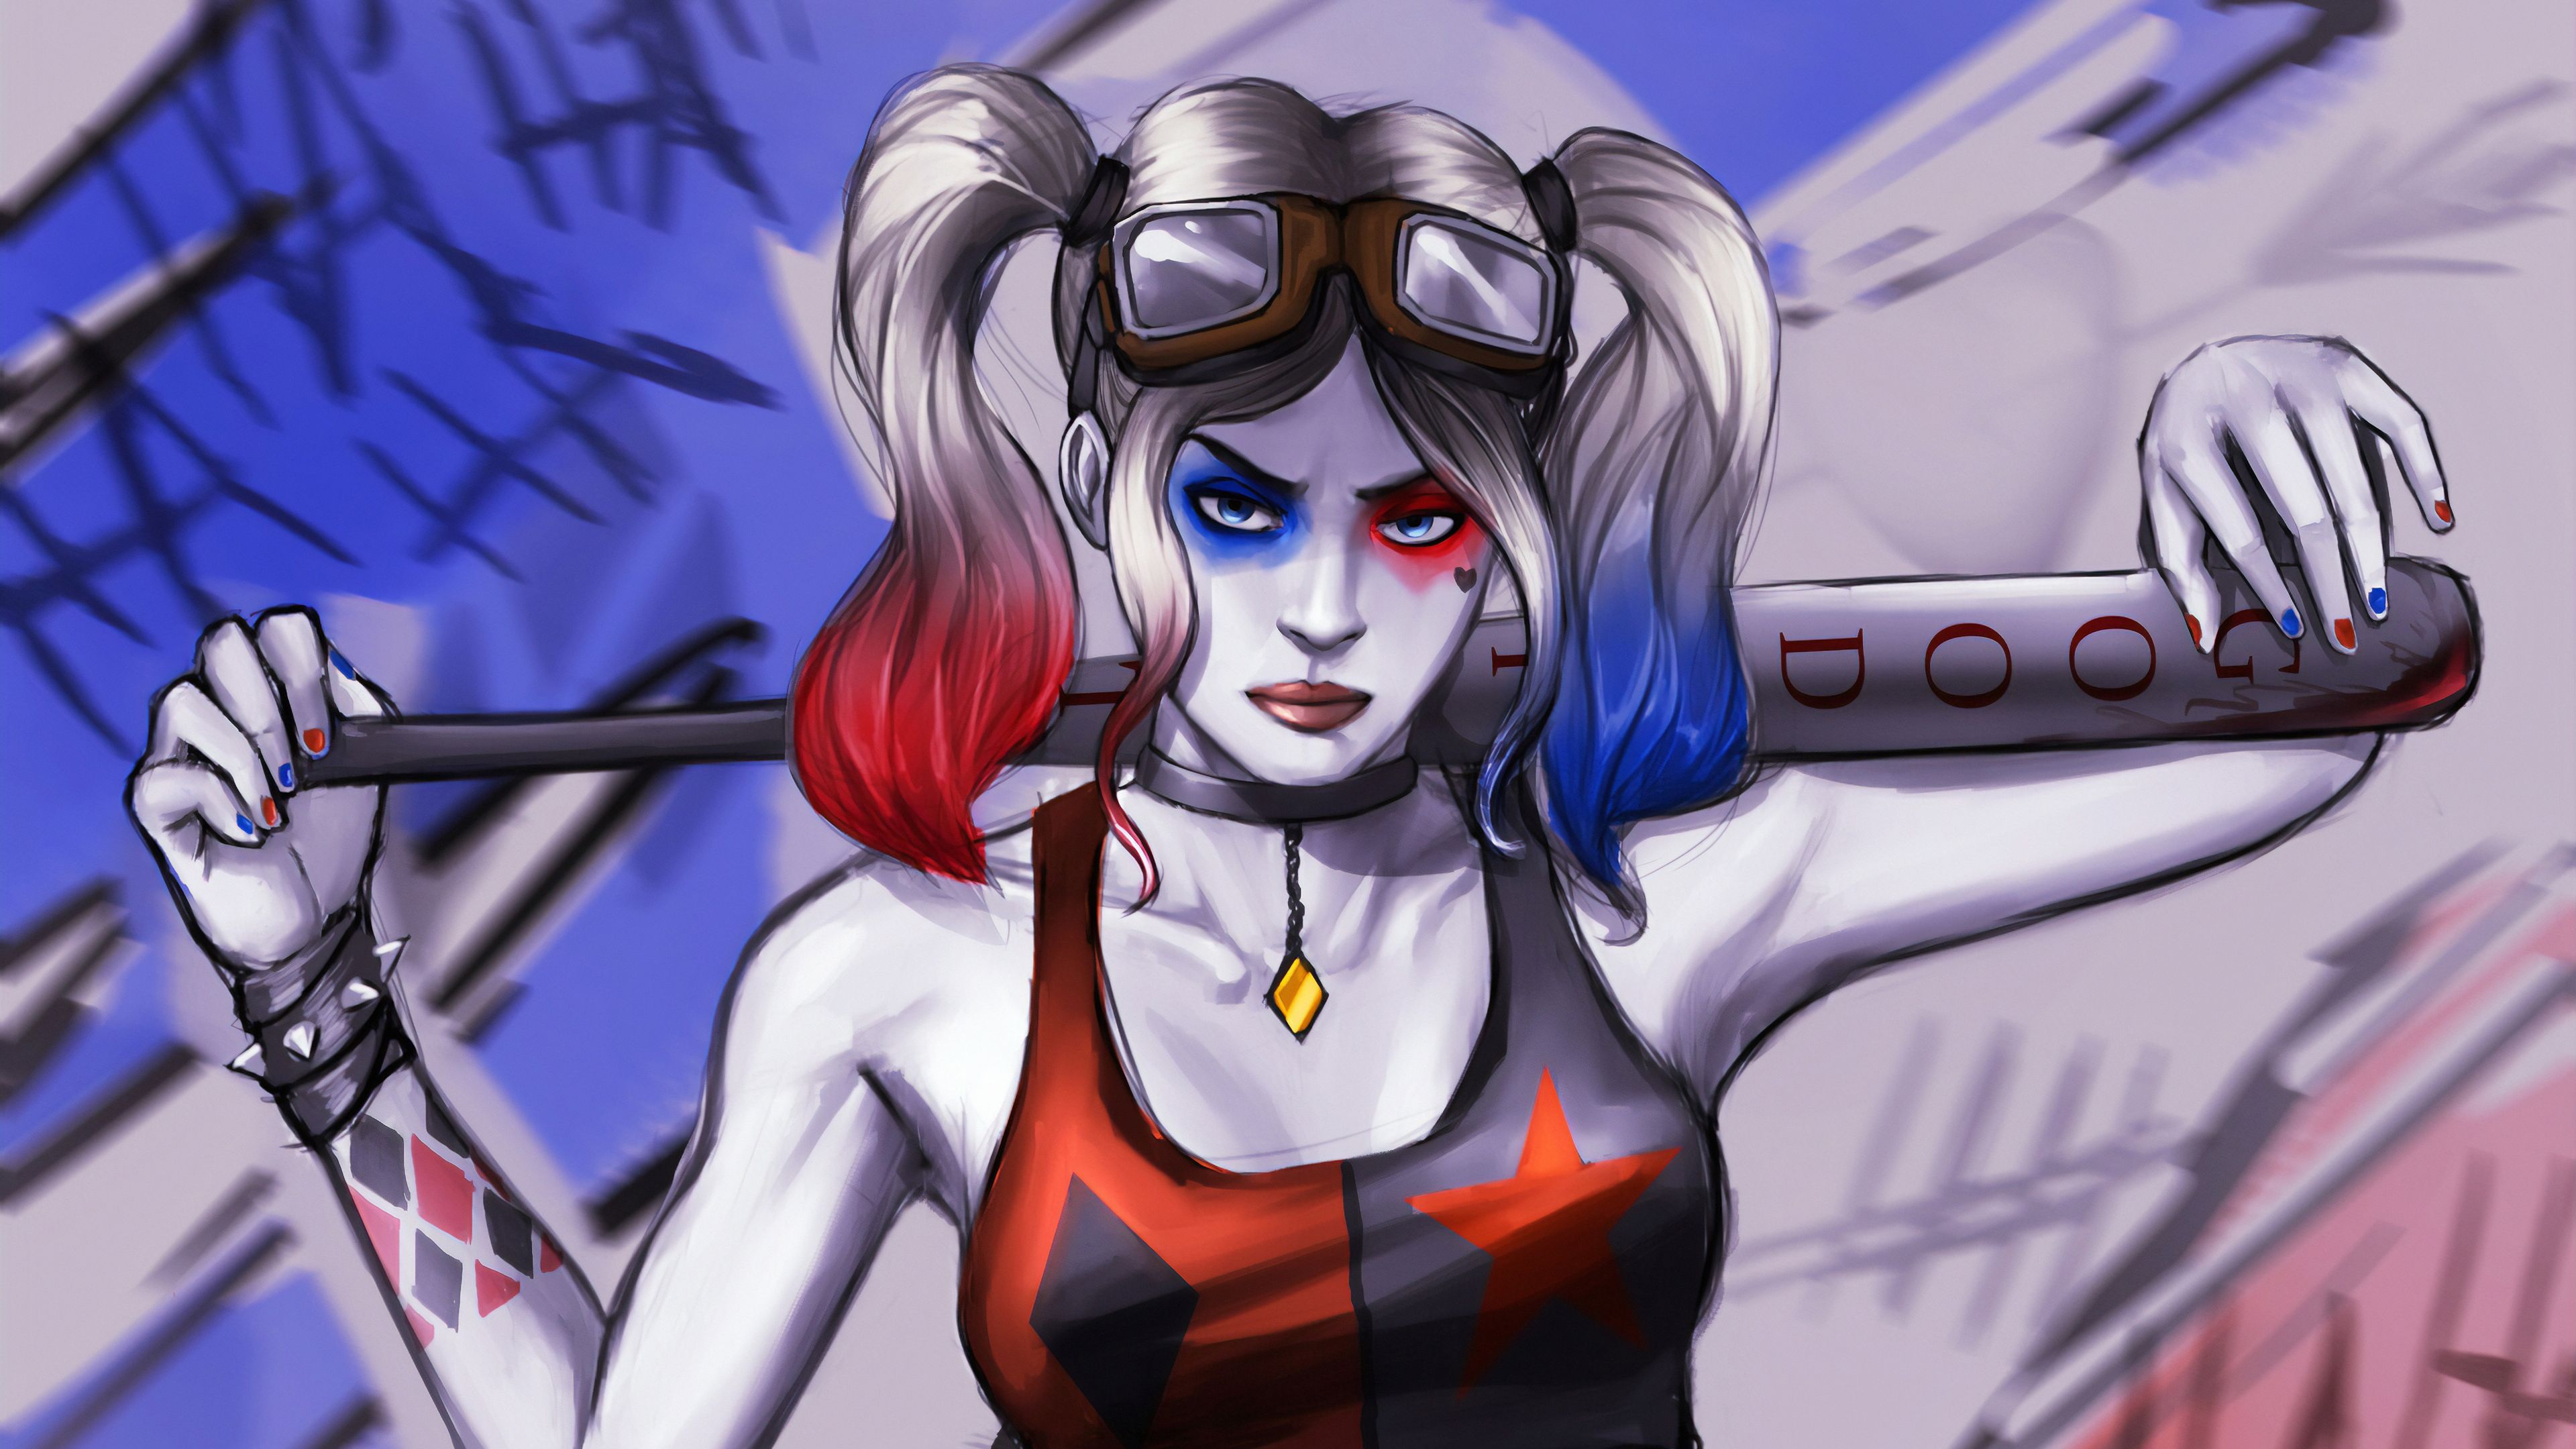 Harley Quinn Sketch Arts, HD Superheroes, 4k Wallpaper, Image, Background, Photo and Picture